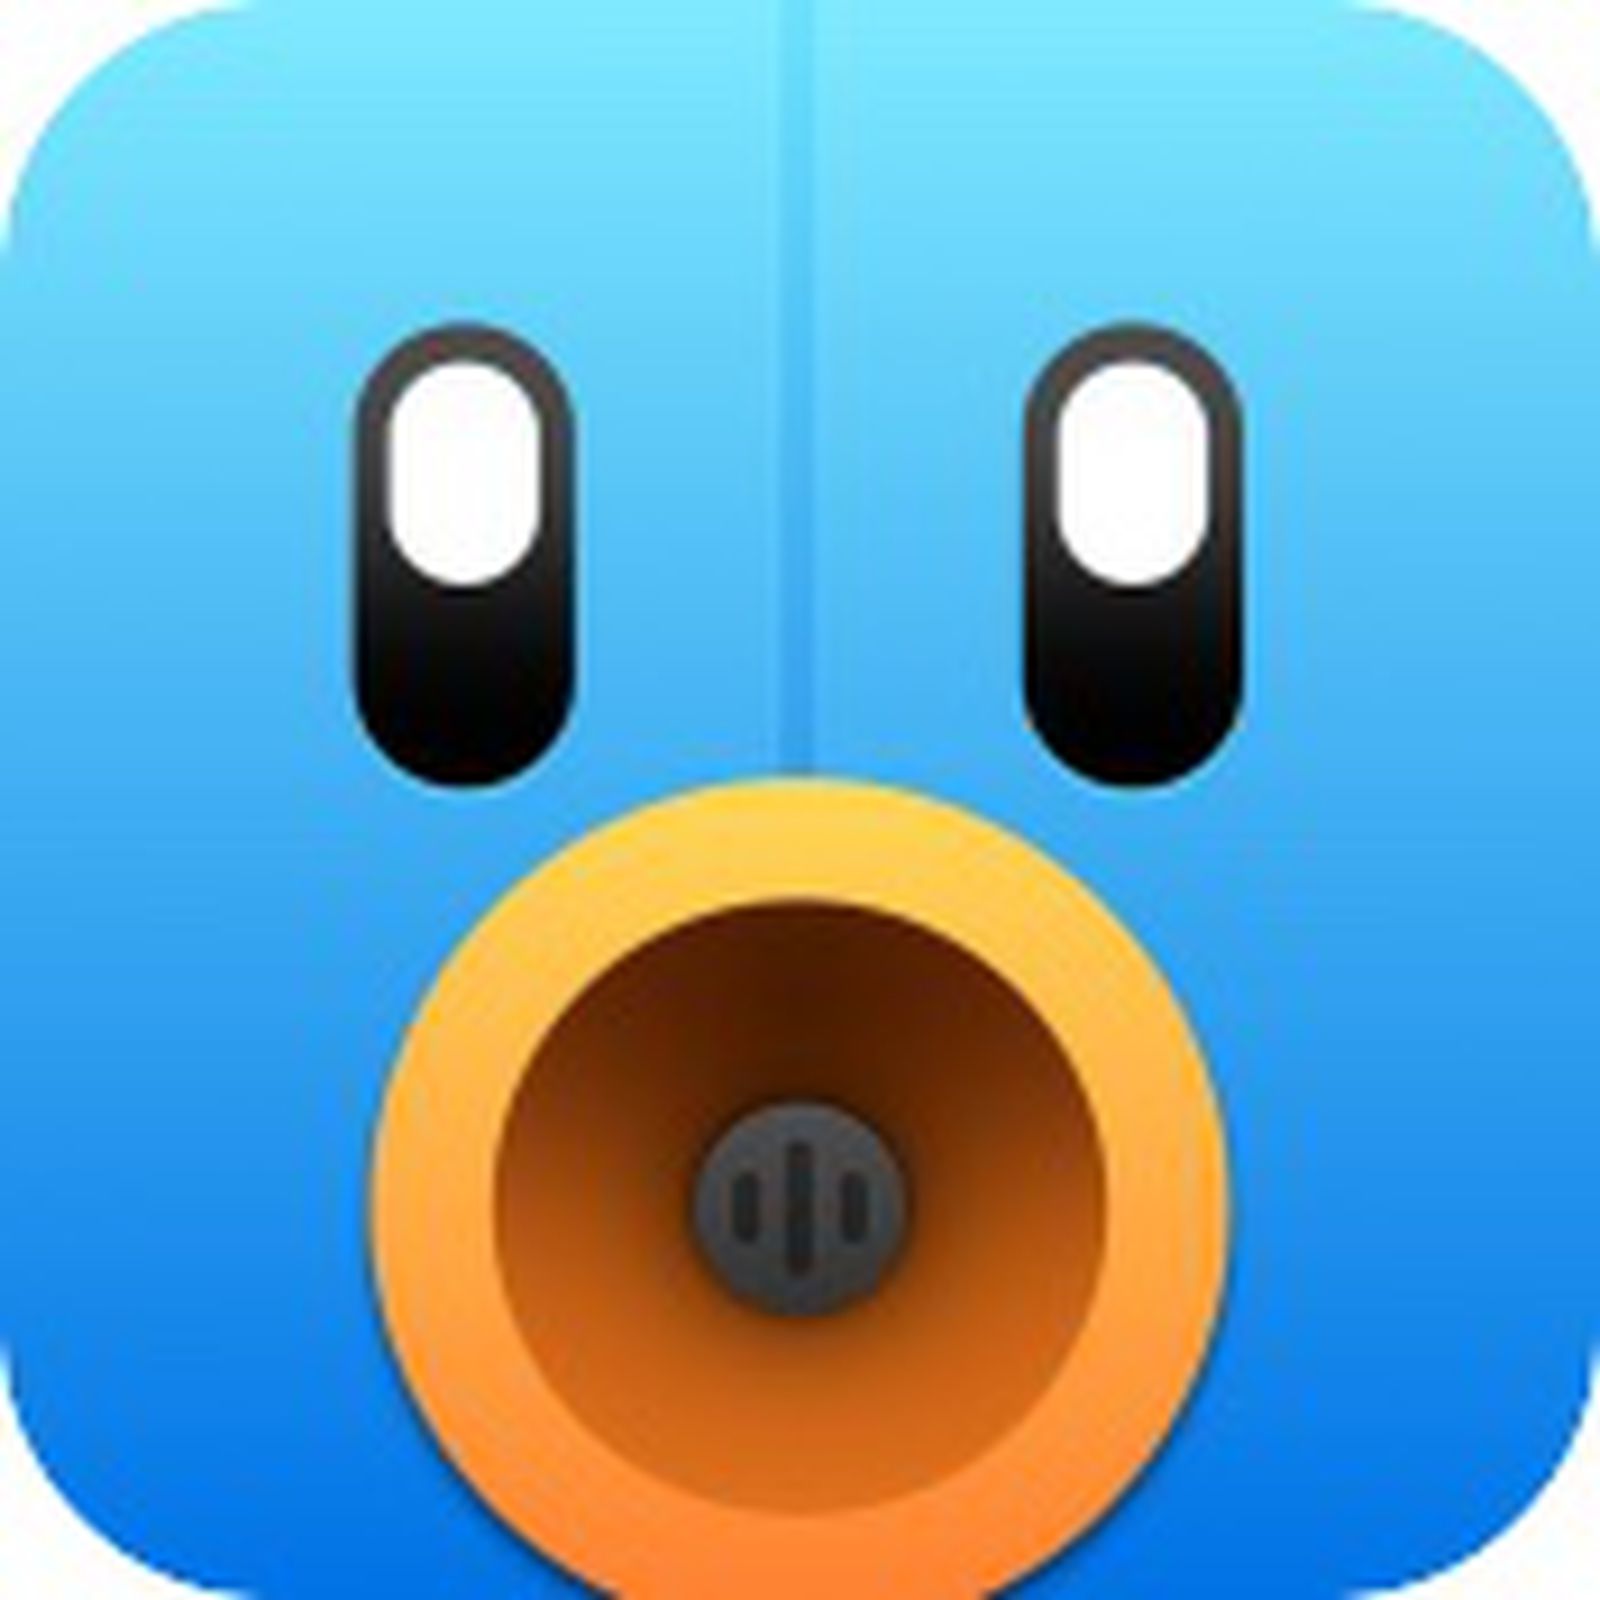 Tweetbot For Ios Gains Support For New 280 Character Tweet Limit Update Mac App Too Macrumors - max ツ on twitter todays api changes for roblox